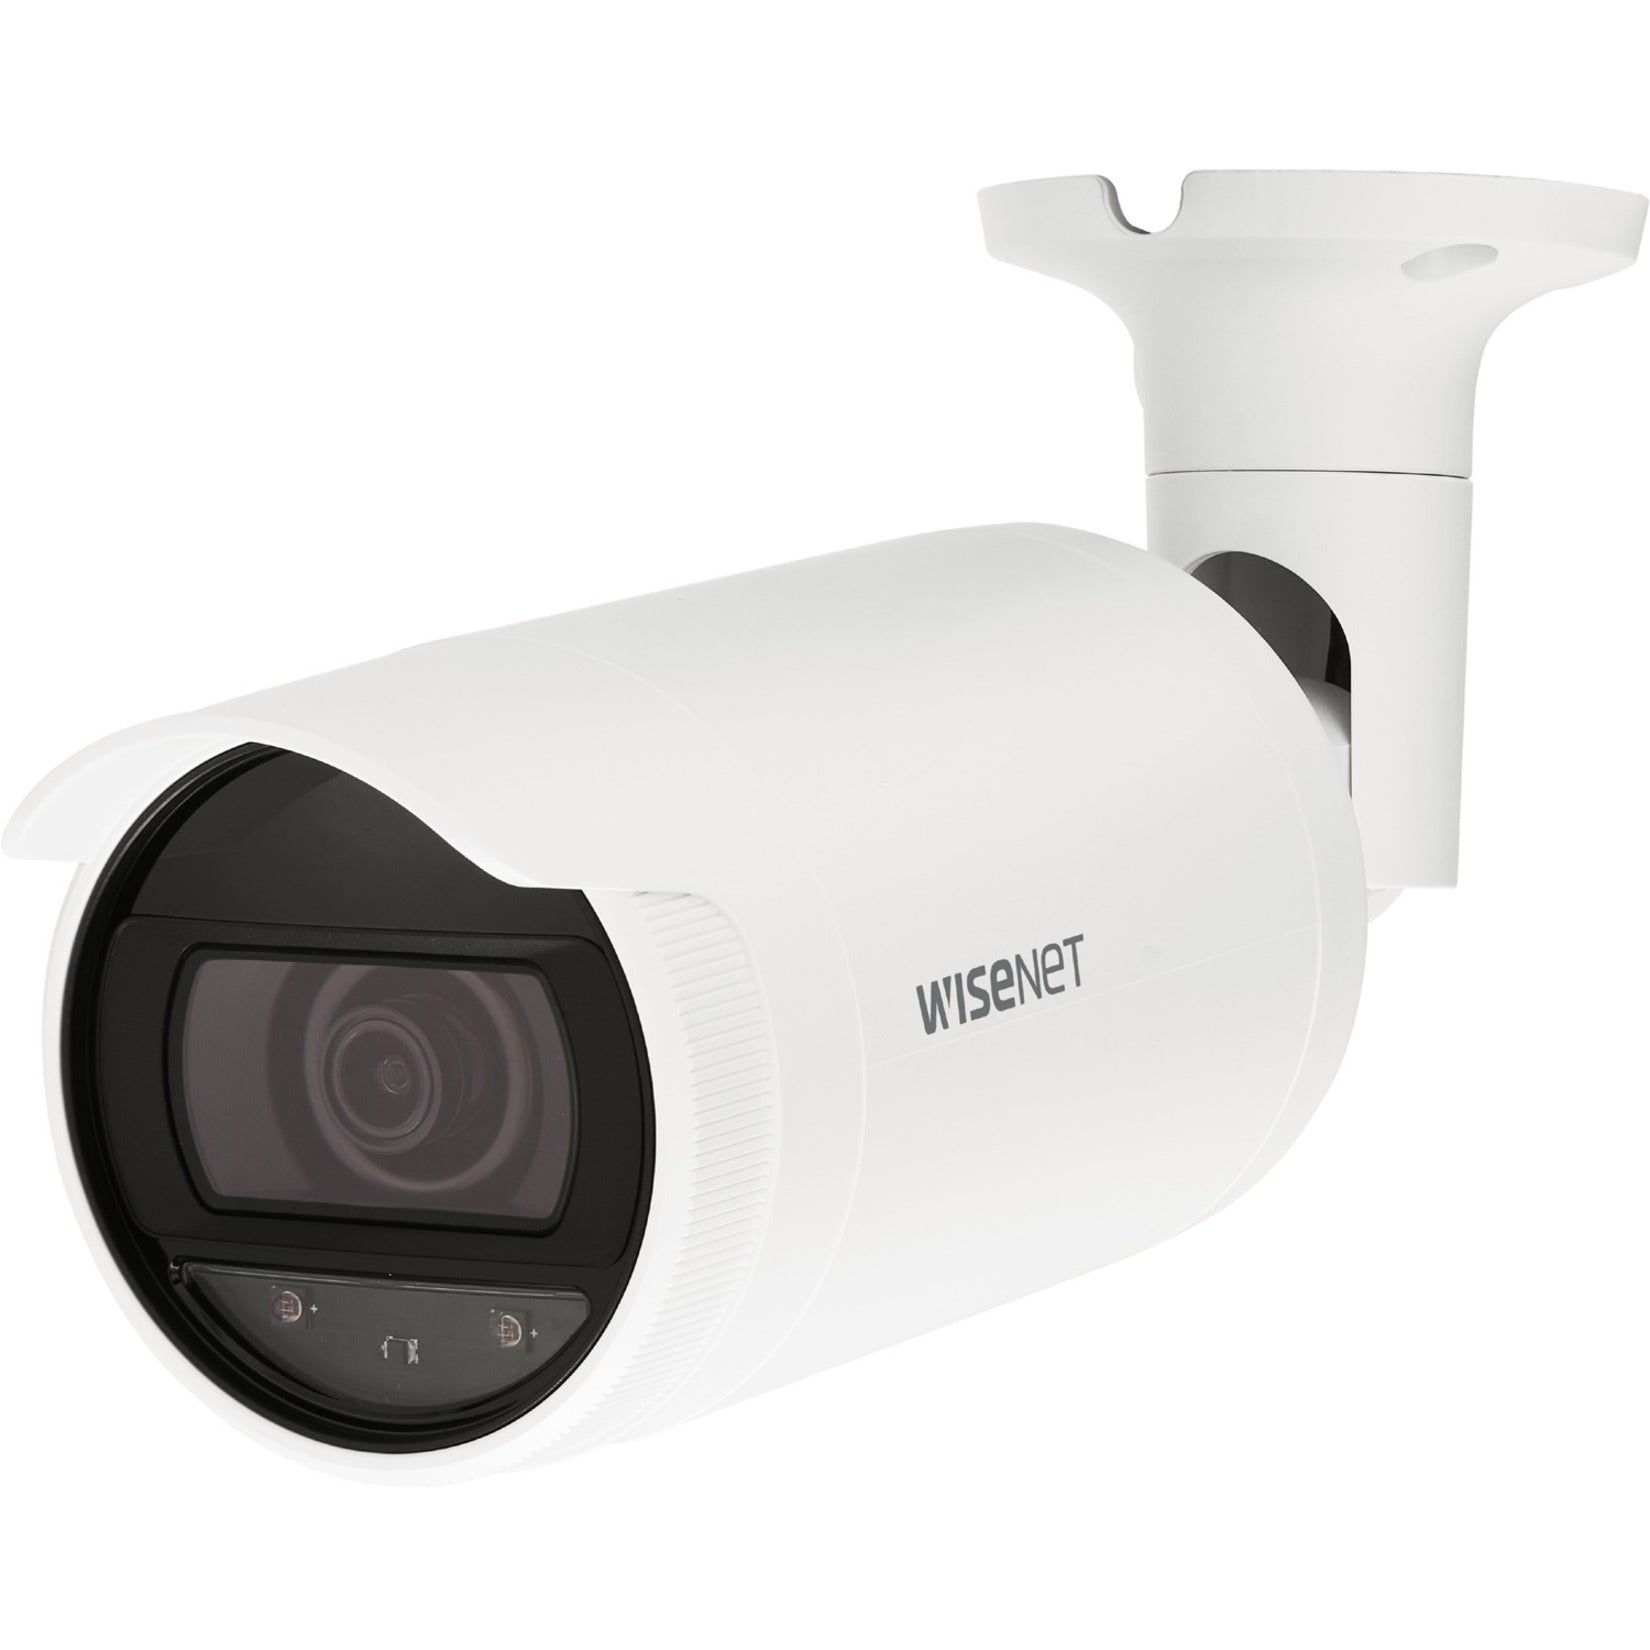 Wisenet ANO-L7012R 4MP IR Bullet Network Camera, Color, 2560 x 1440, SD Card Local Storage, Motion Detection, IP66